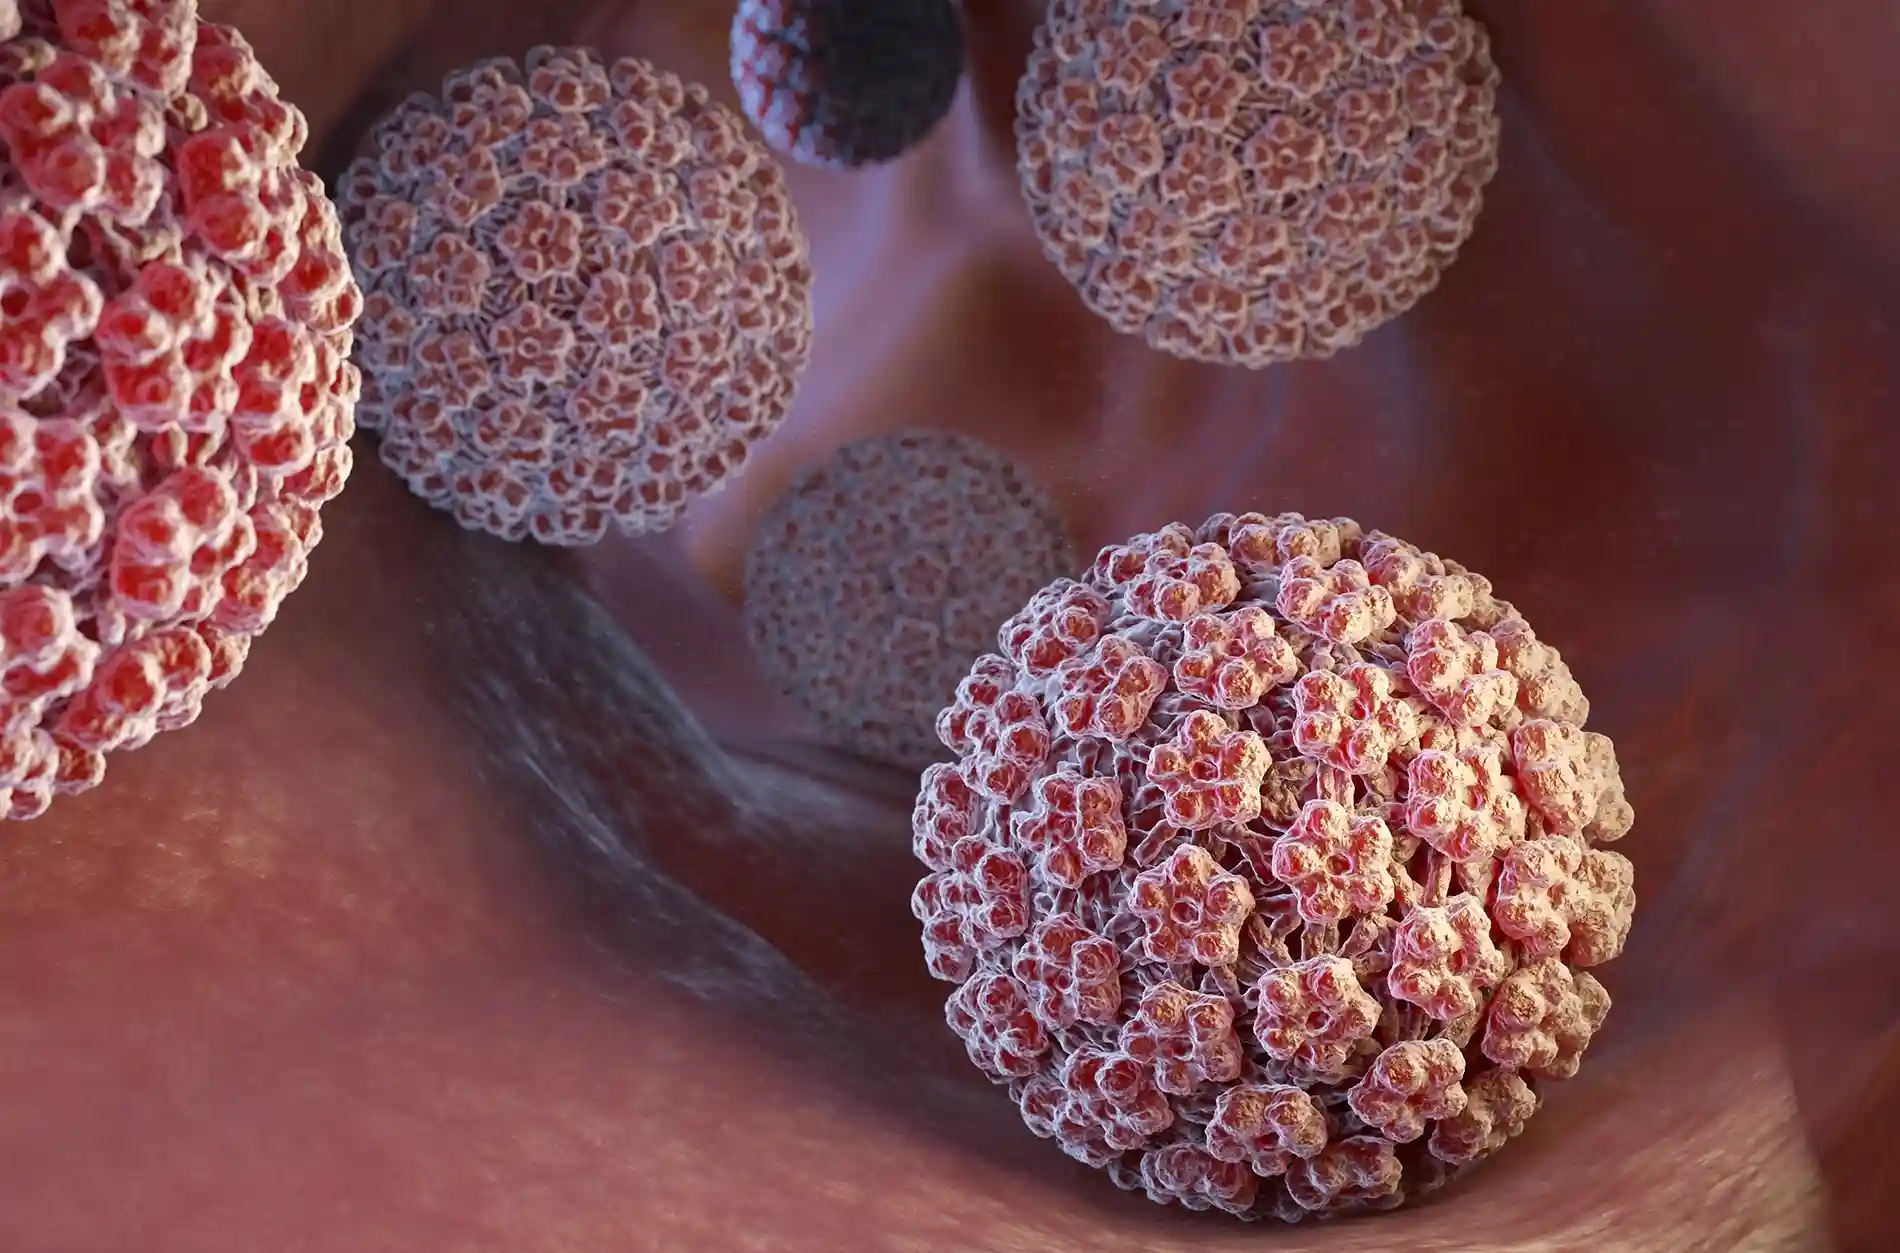 picture of HPV virus